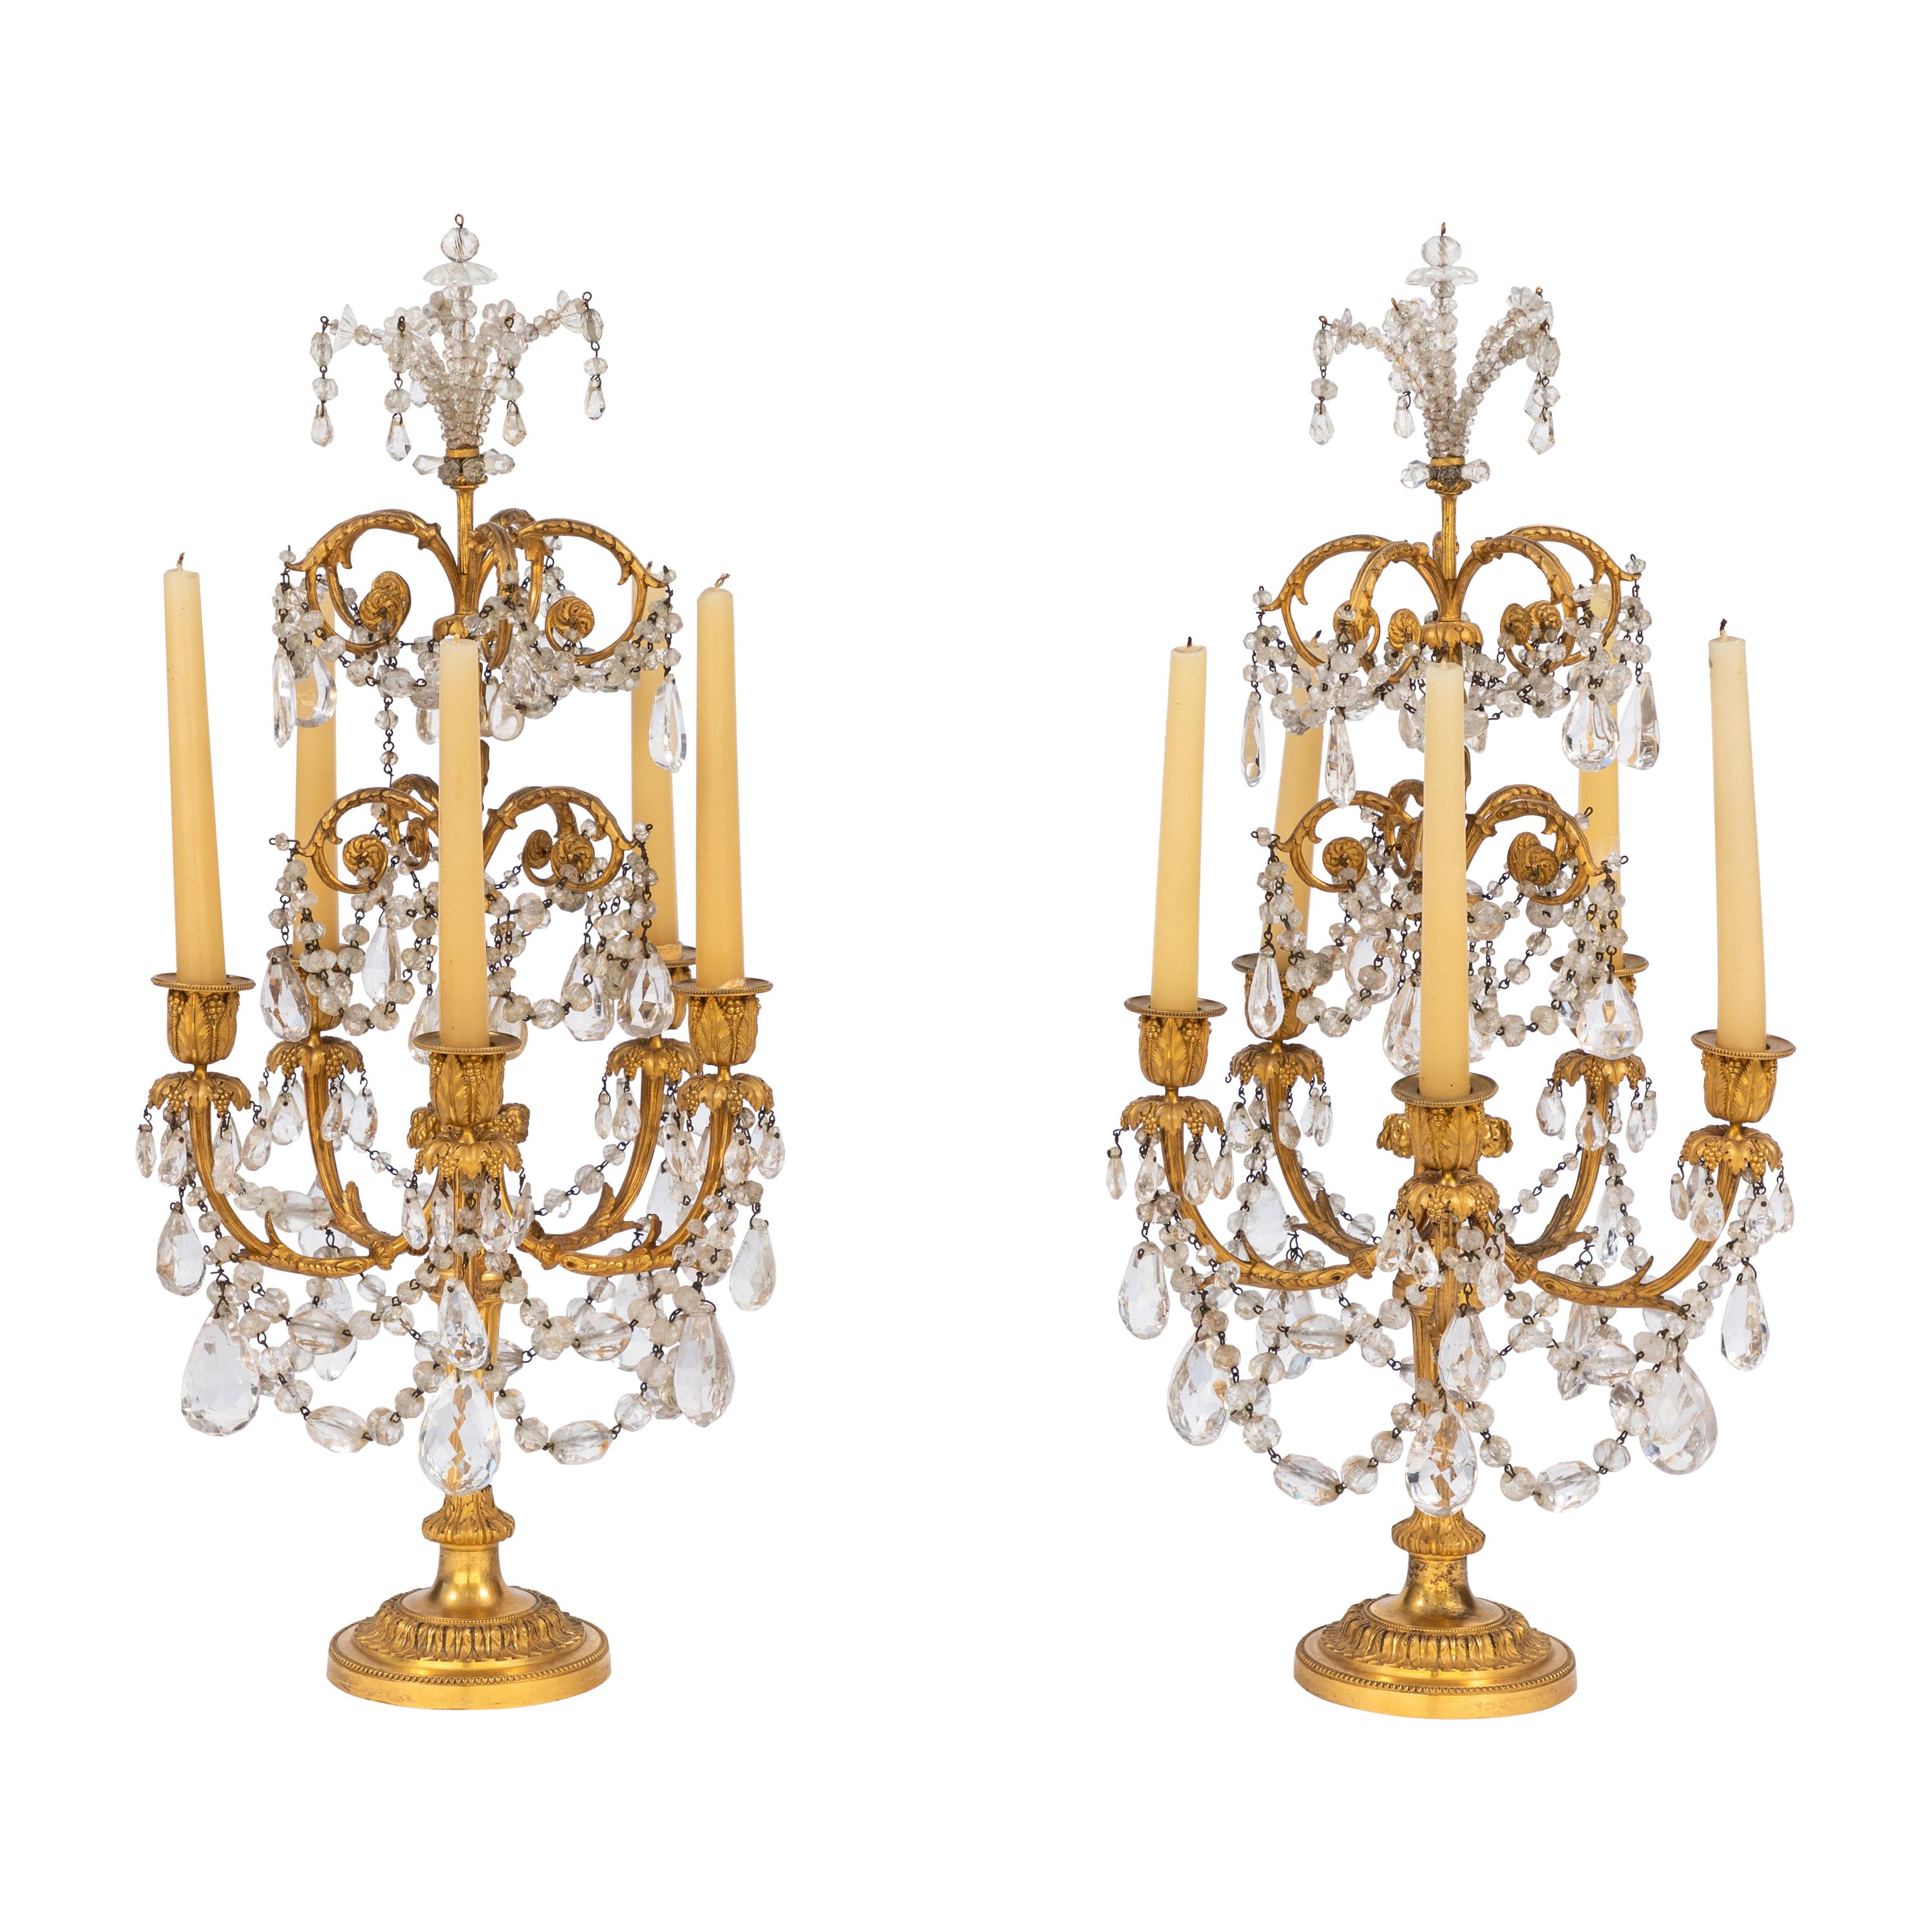 Pair of 19th Century French Doré Bronze and Rock Crystal Girandoles